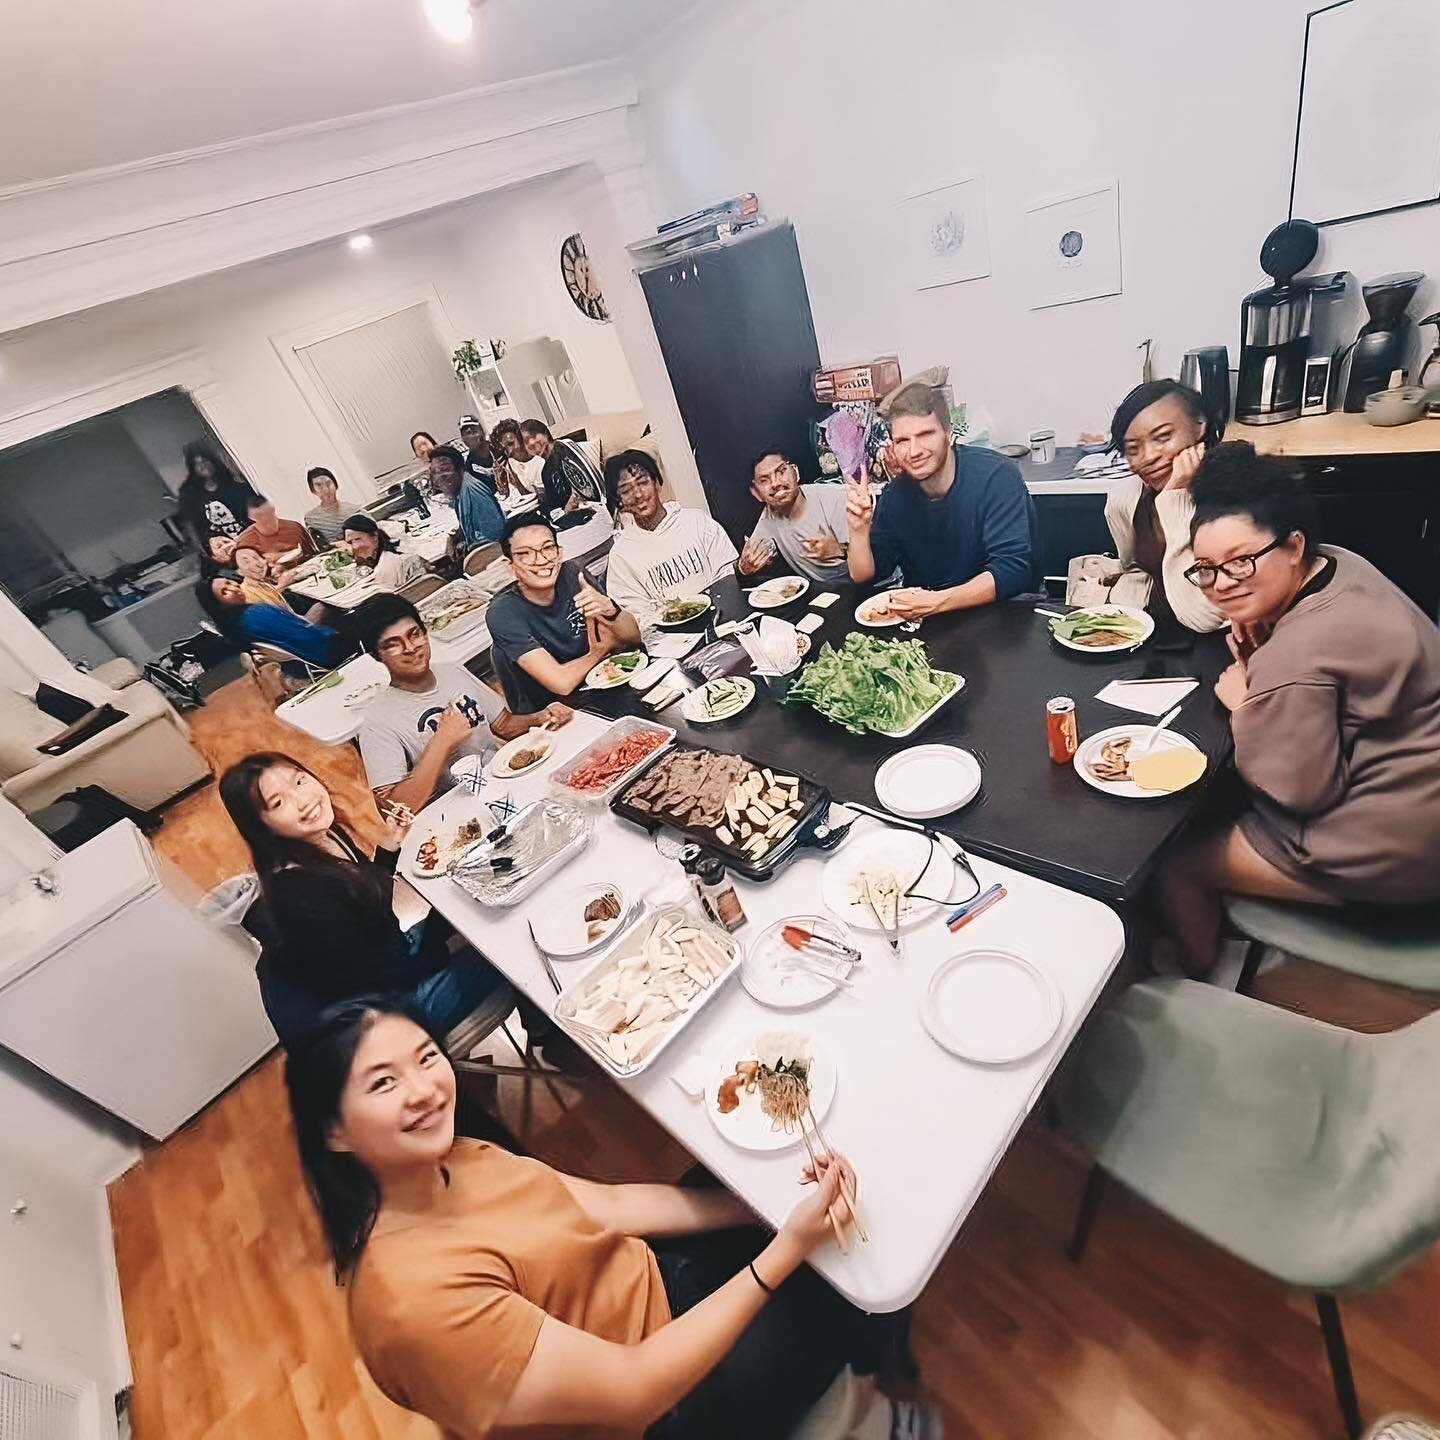 good food + even better company at our homes 🍴🏡

#openhome